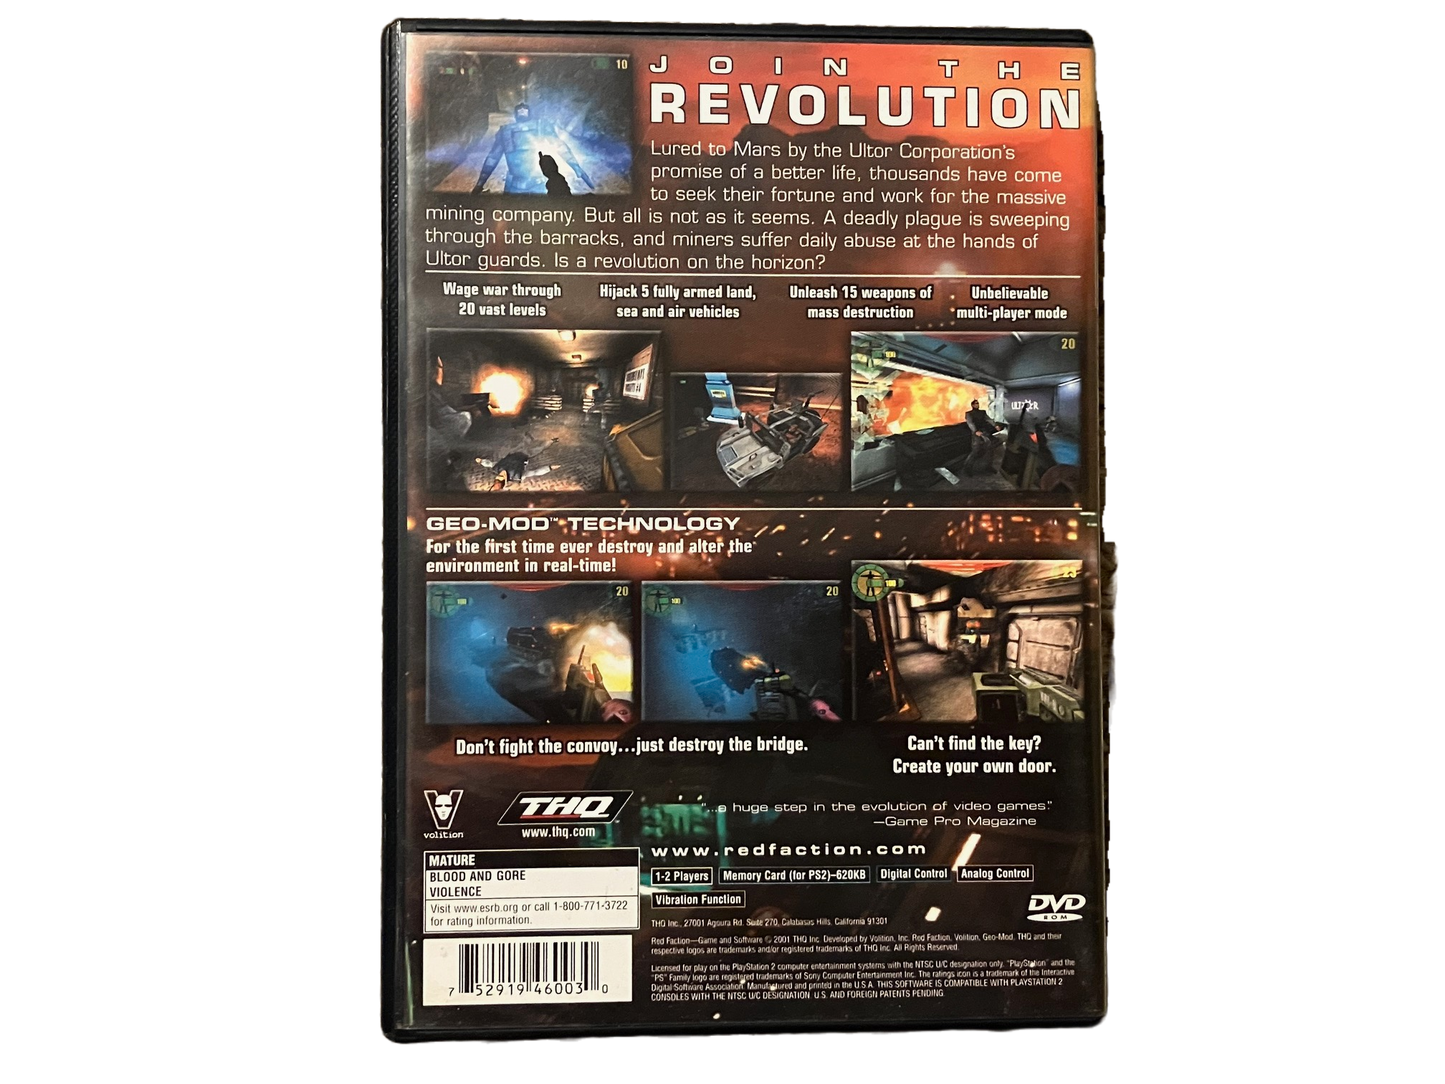 Red Faction Sony PlayStation 2 PS2 Complete